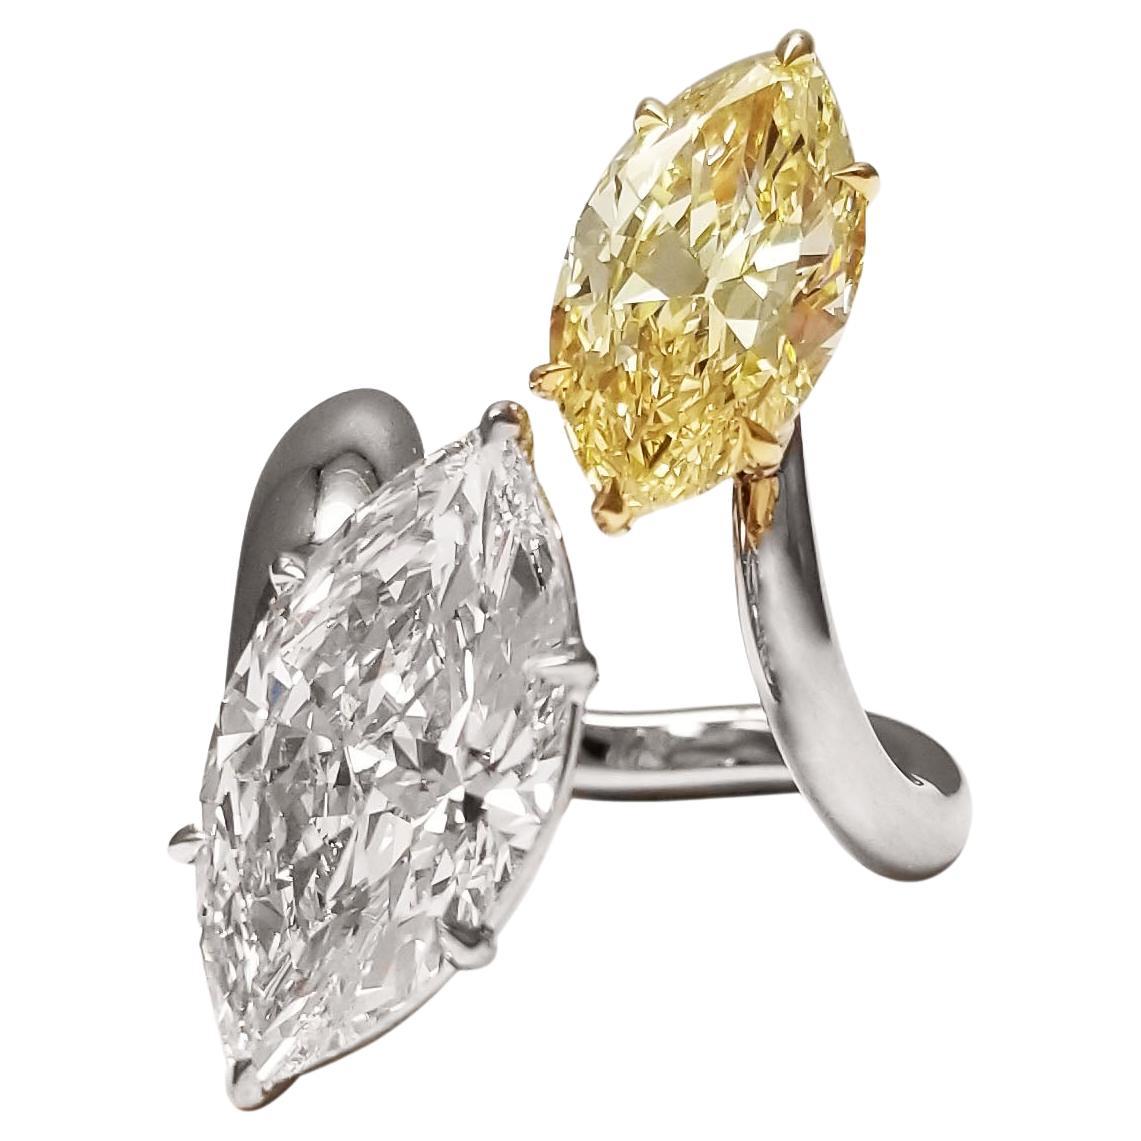 Exquisite style and wearability come with this platinum Diamond ring, presenting a 5-carat white Marquise from the Millennium Collection from DeBeers, an offering from the year 1999. Set next to a Scarselli's Fancy Yellow 3 carat marquise Diamond,